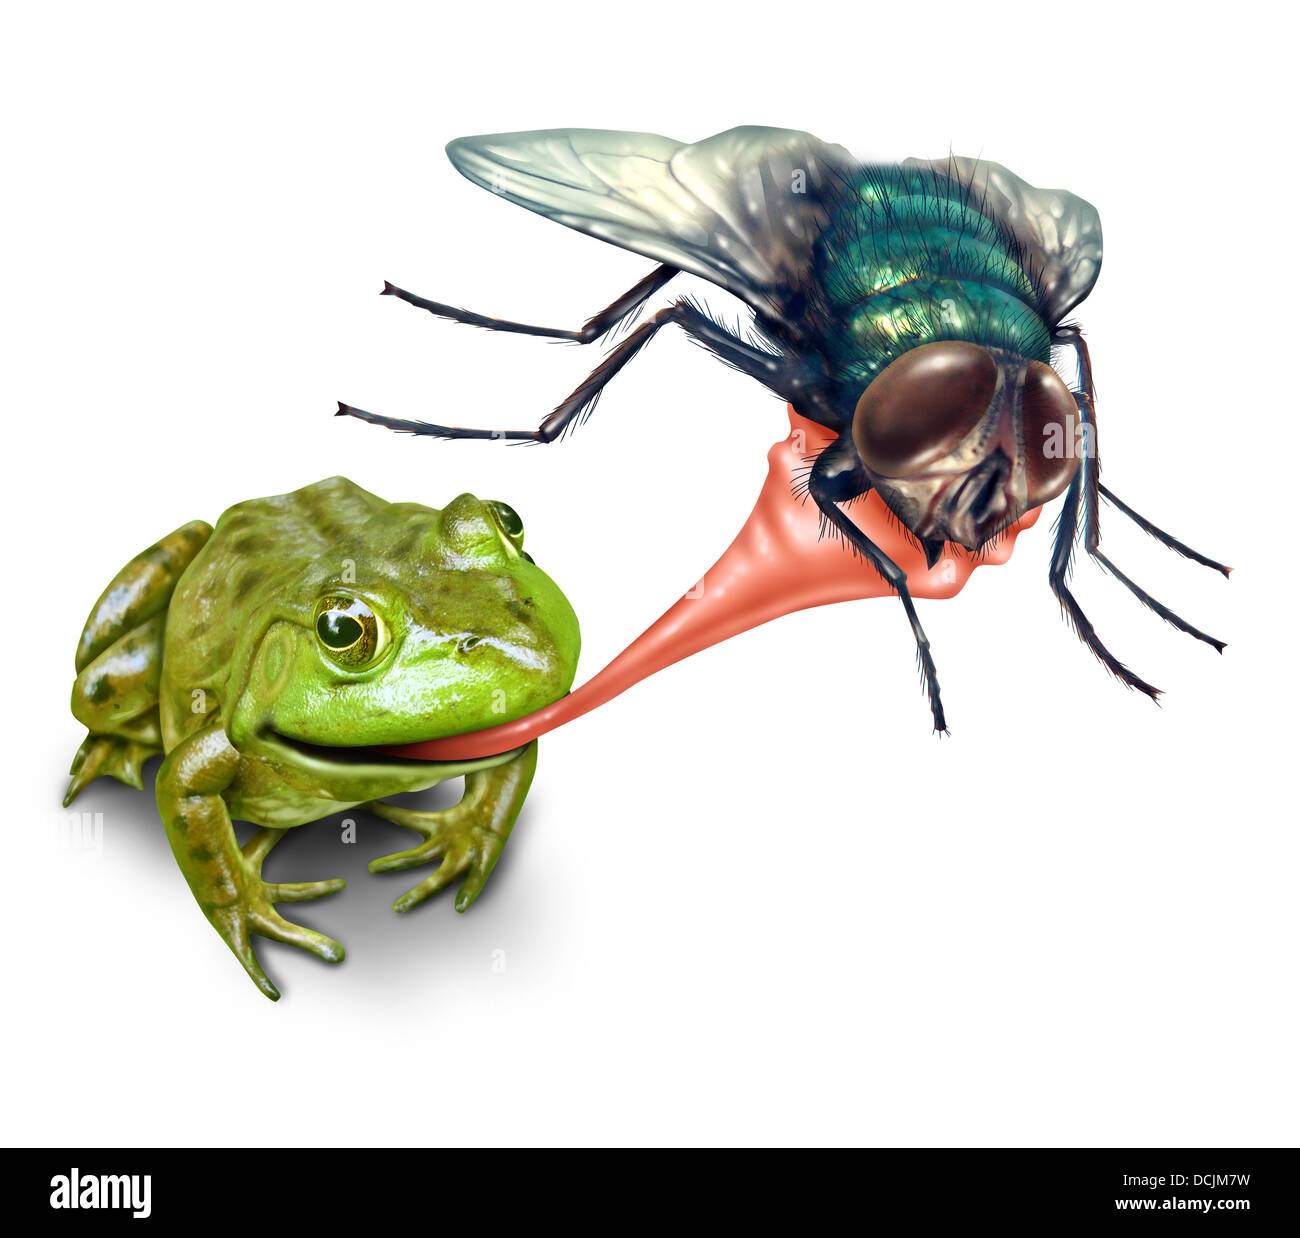 Frog catching bug with a sticky tongue shooting out as a nature concept of the natural cycle of life where a green amphibian eats a fly insect for survival on a white background. Stock Photo